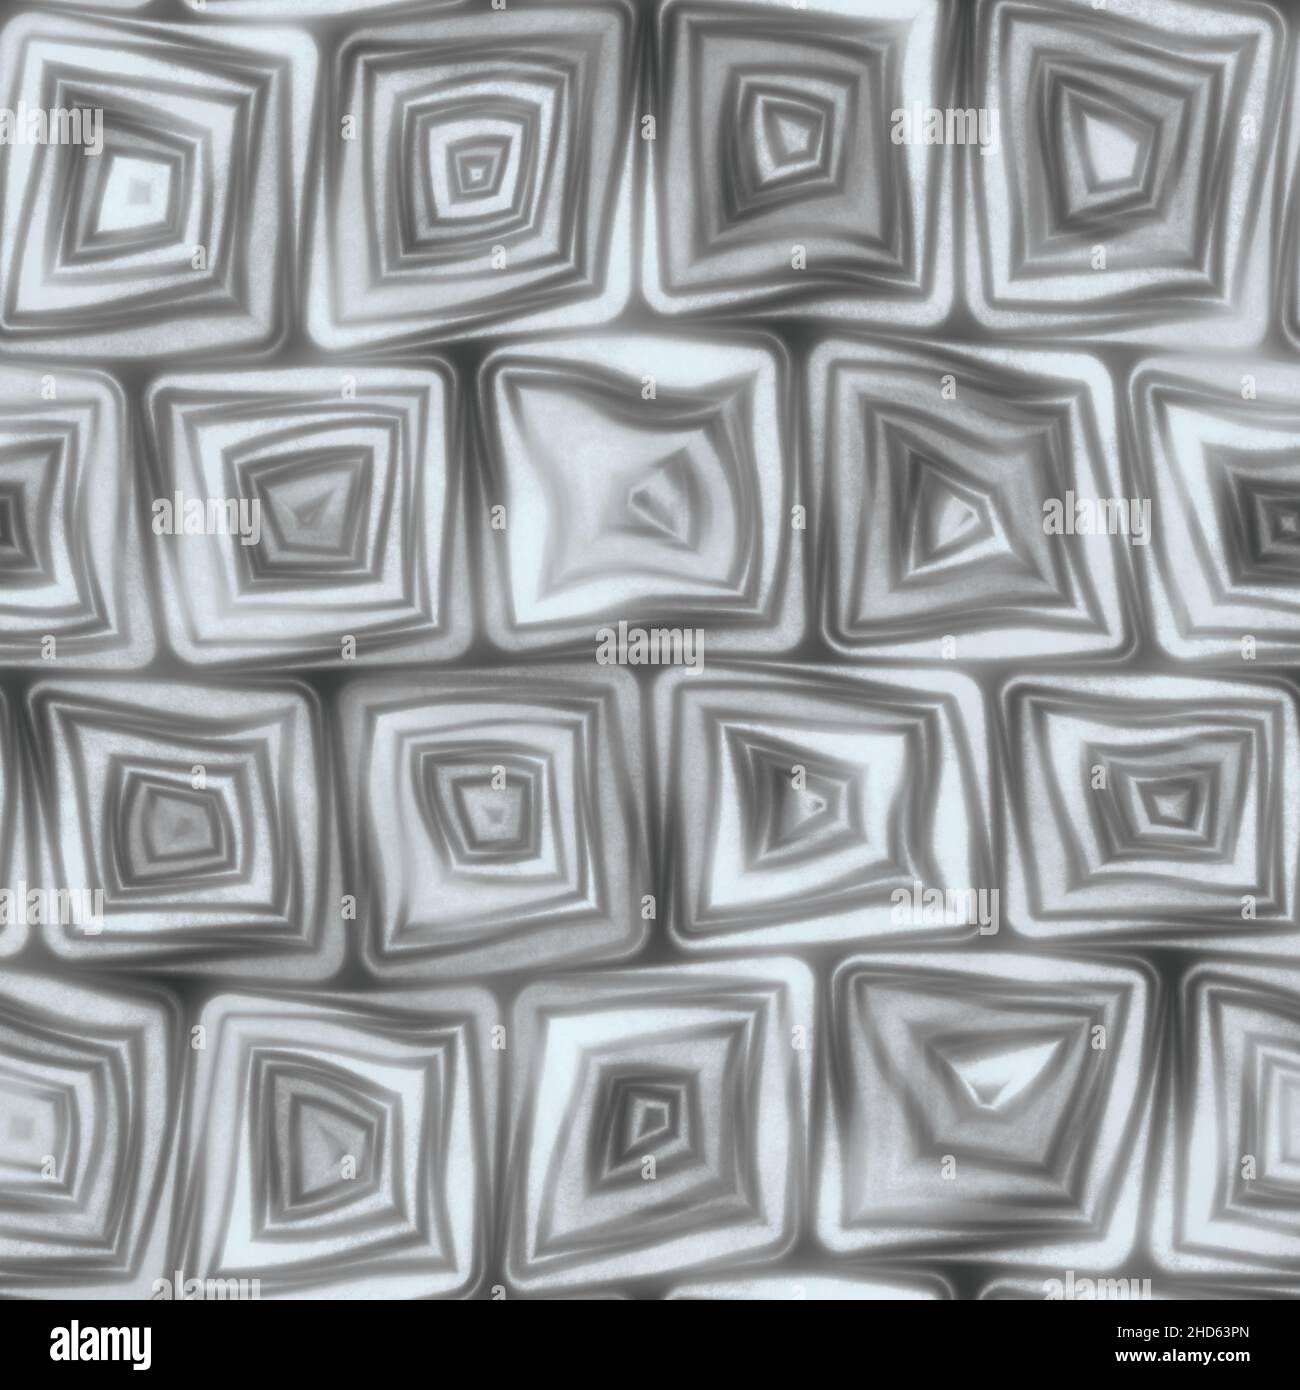 Large Grey Squiggly Swirly Spiral Squares Seamless Texture Pattern Stock Photo